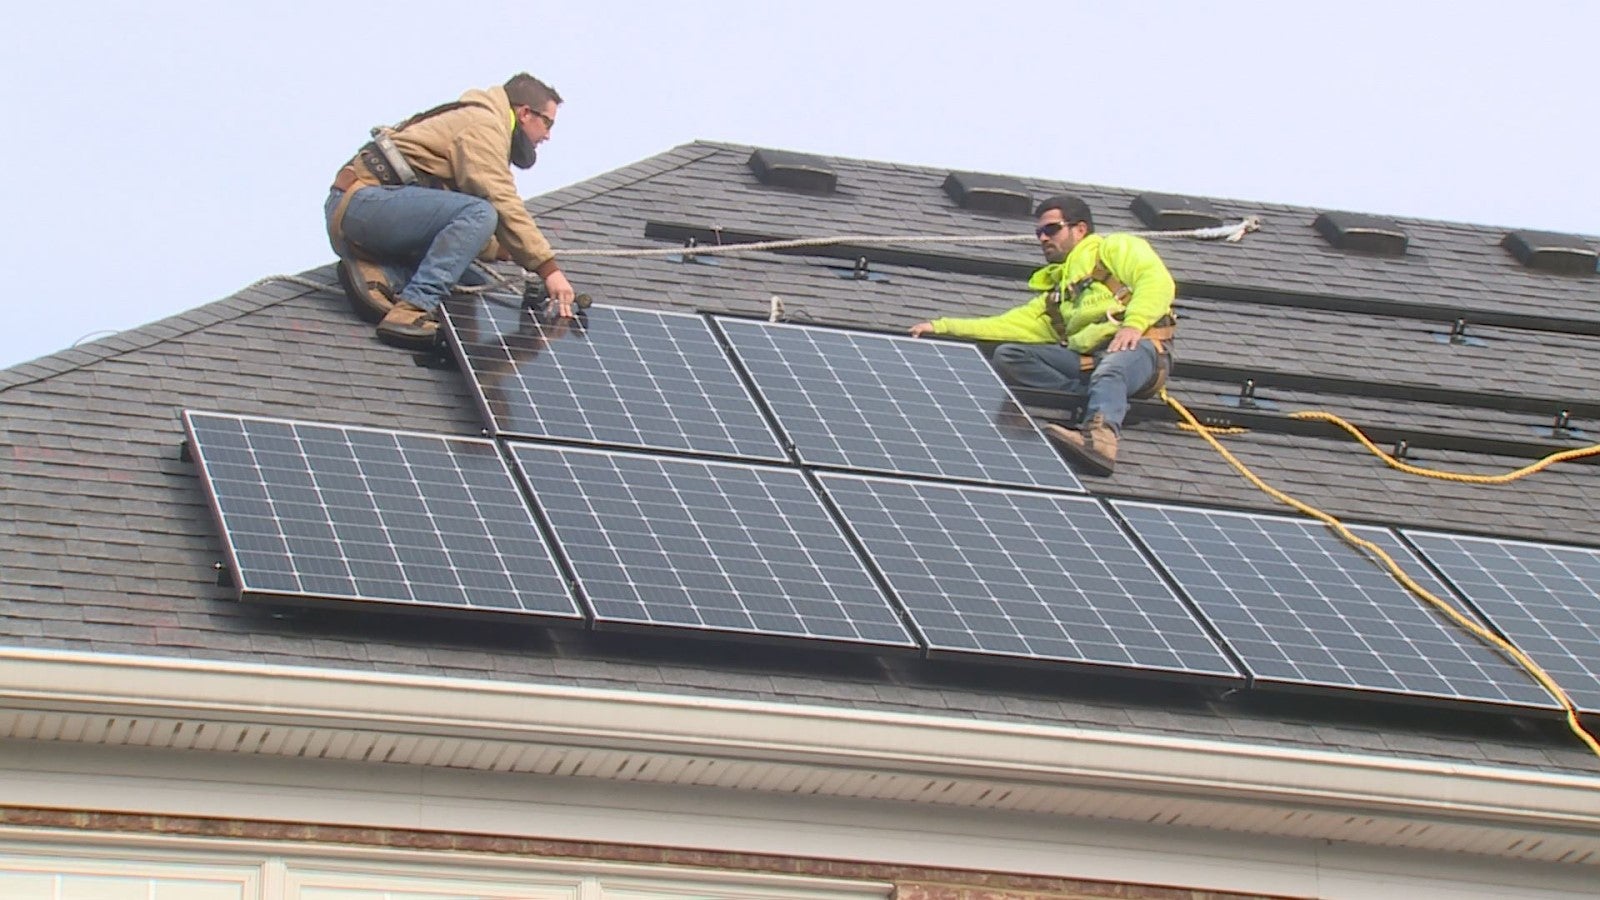 two tradesmen install solar panels on a shingled rooftop